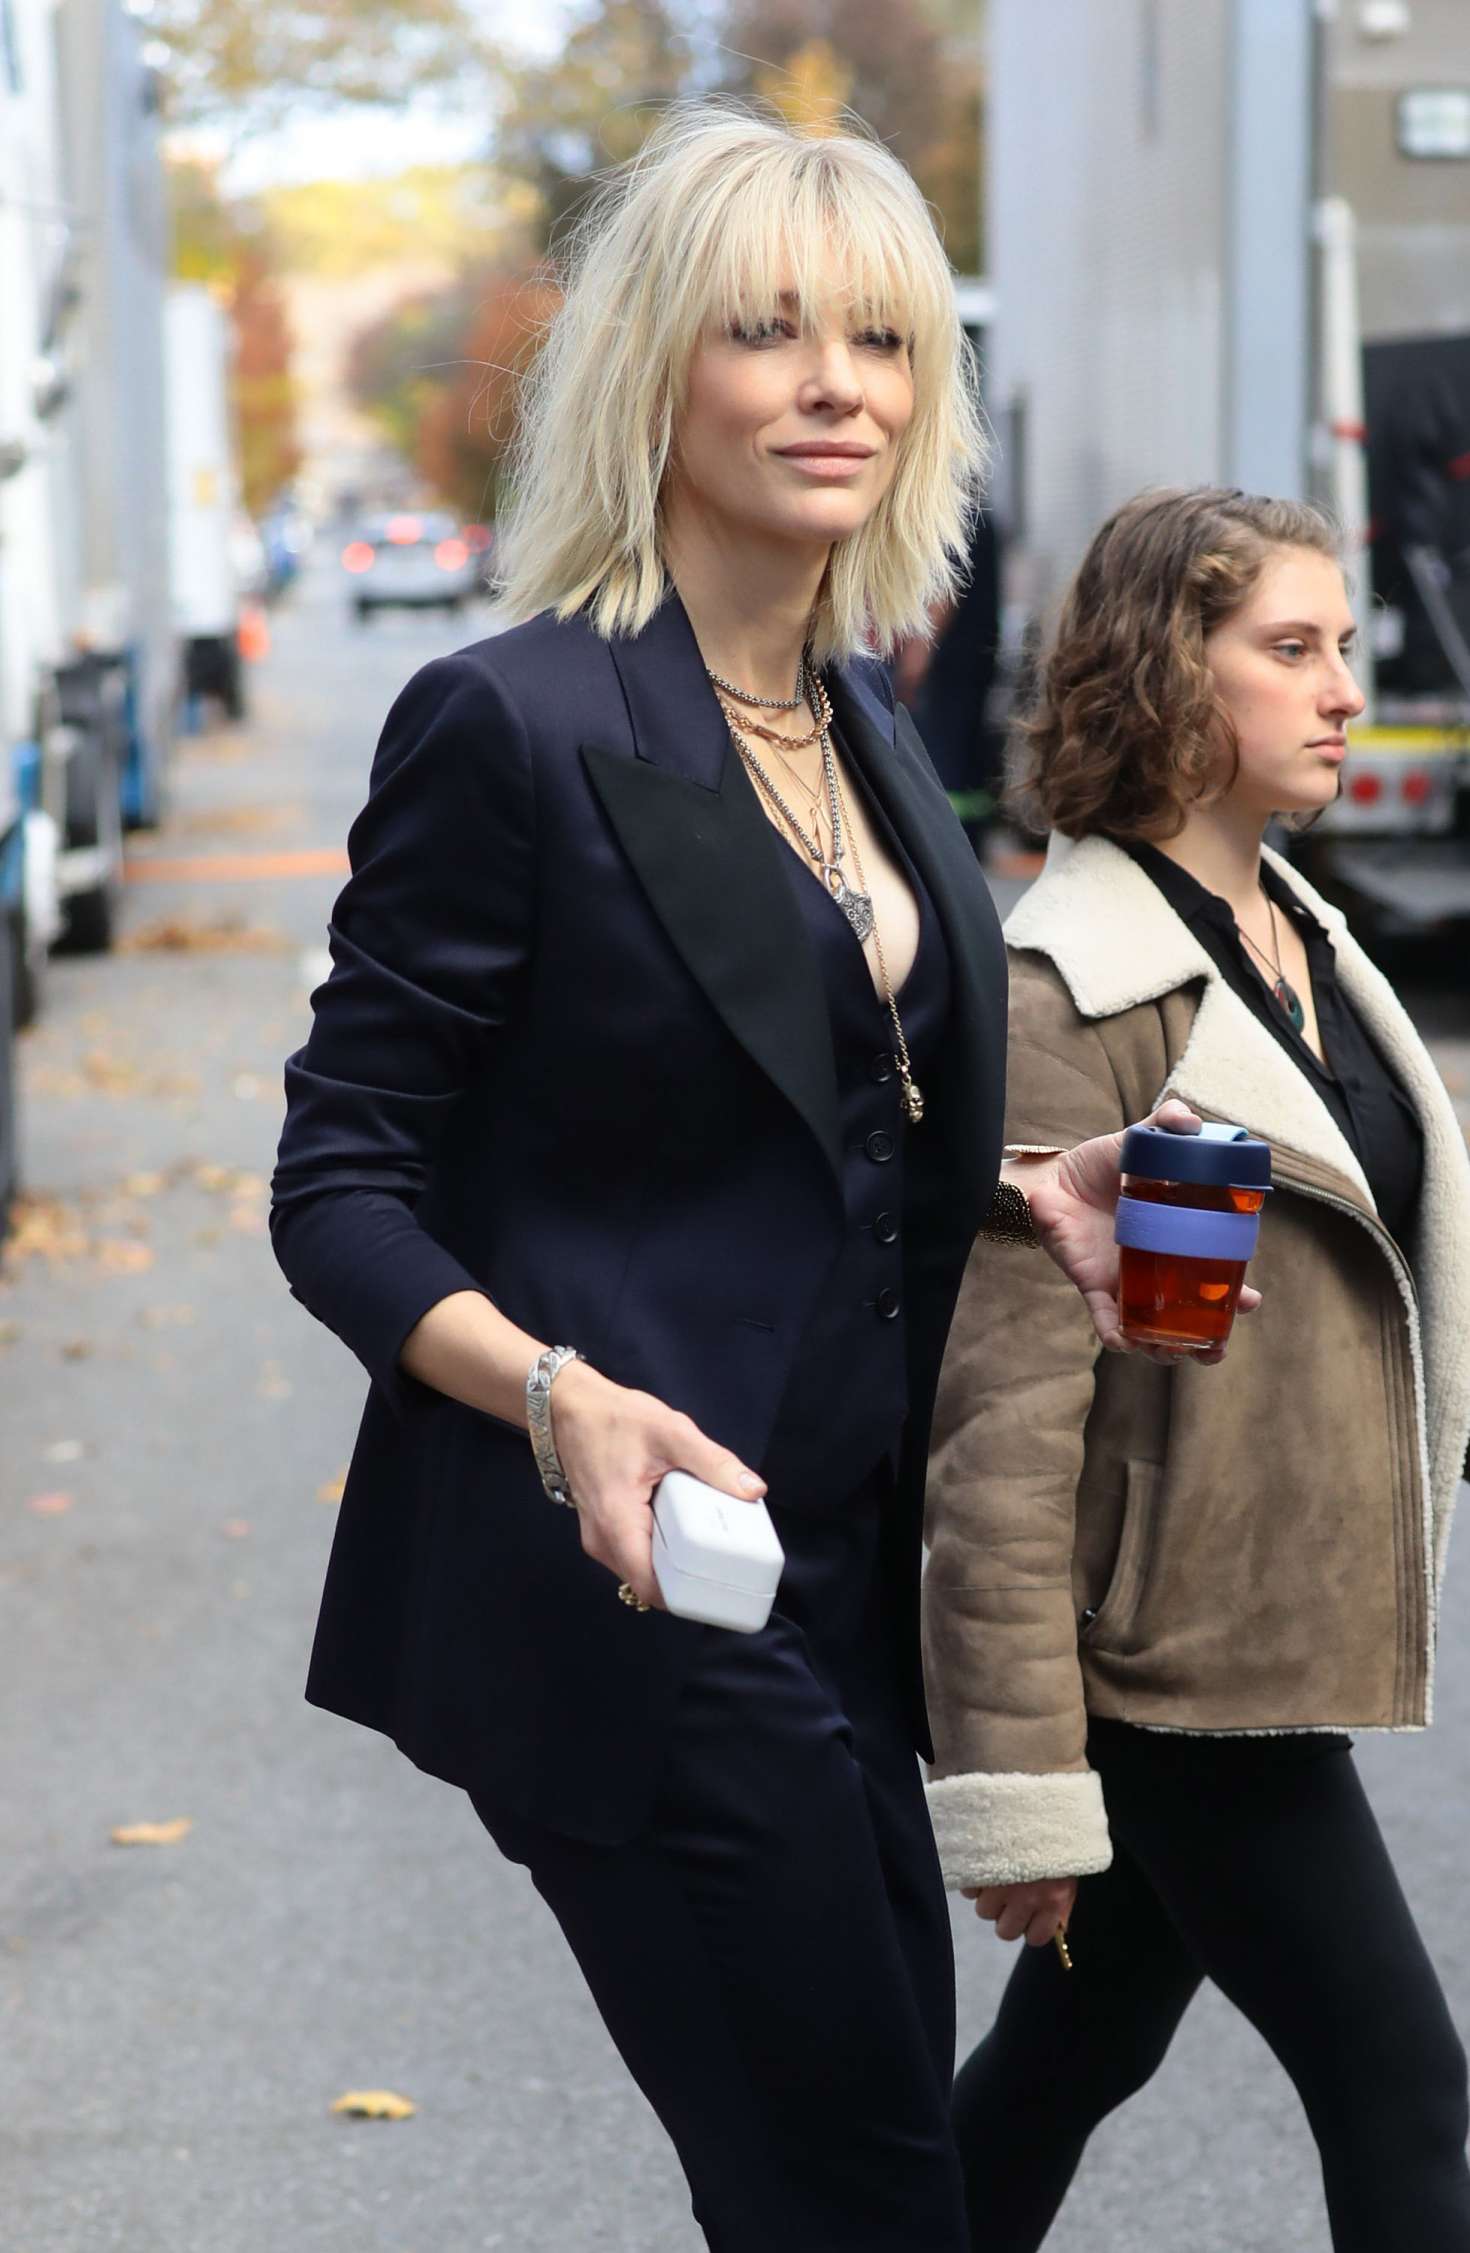 Cate Blanchett on the Set of Oceans Eight -04 – GotCeleb